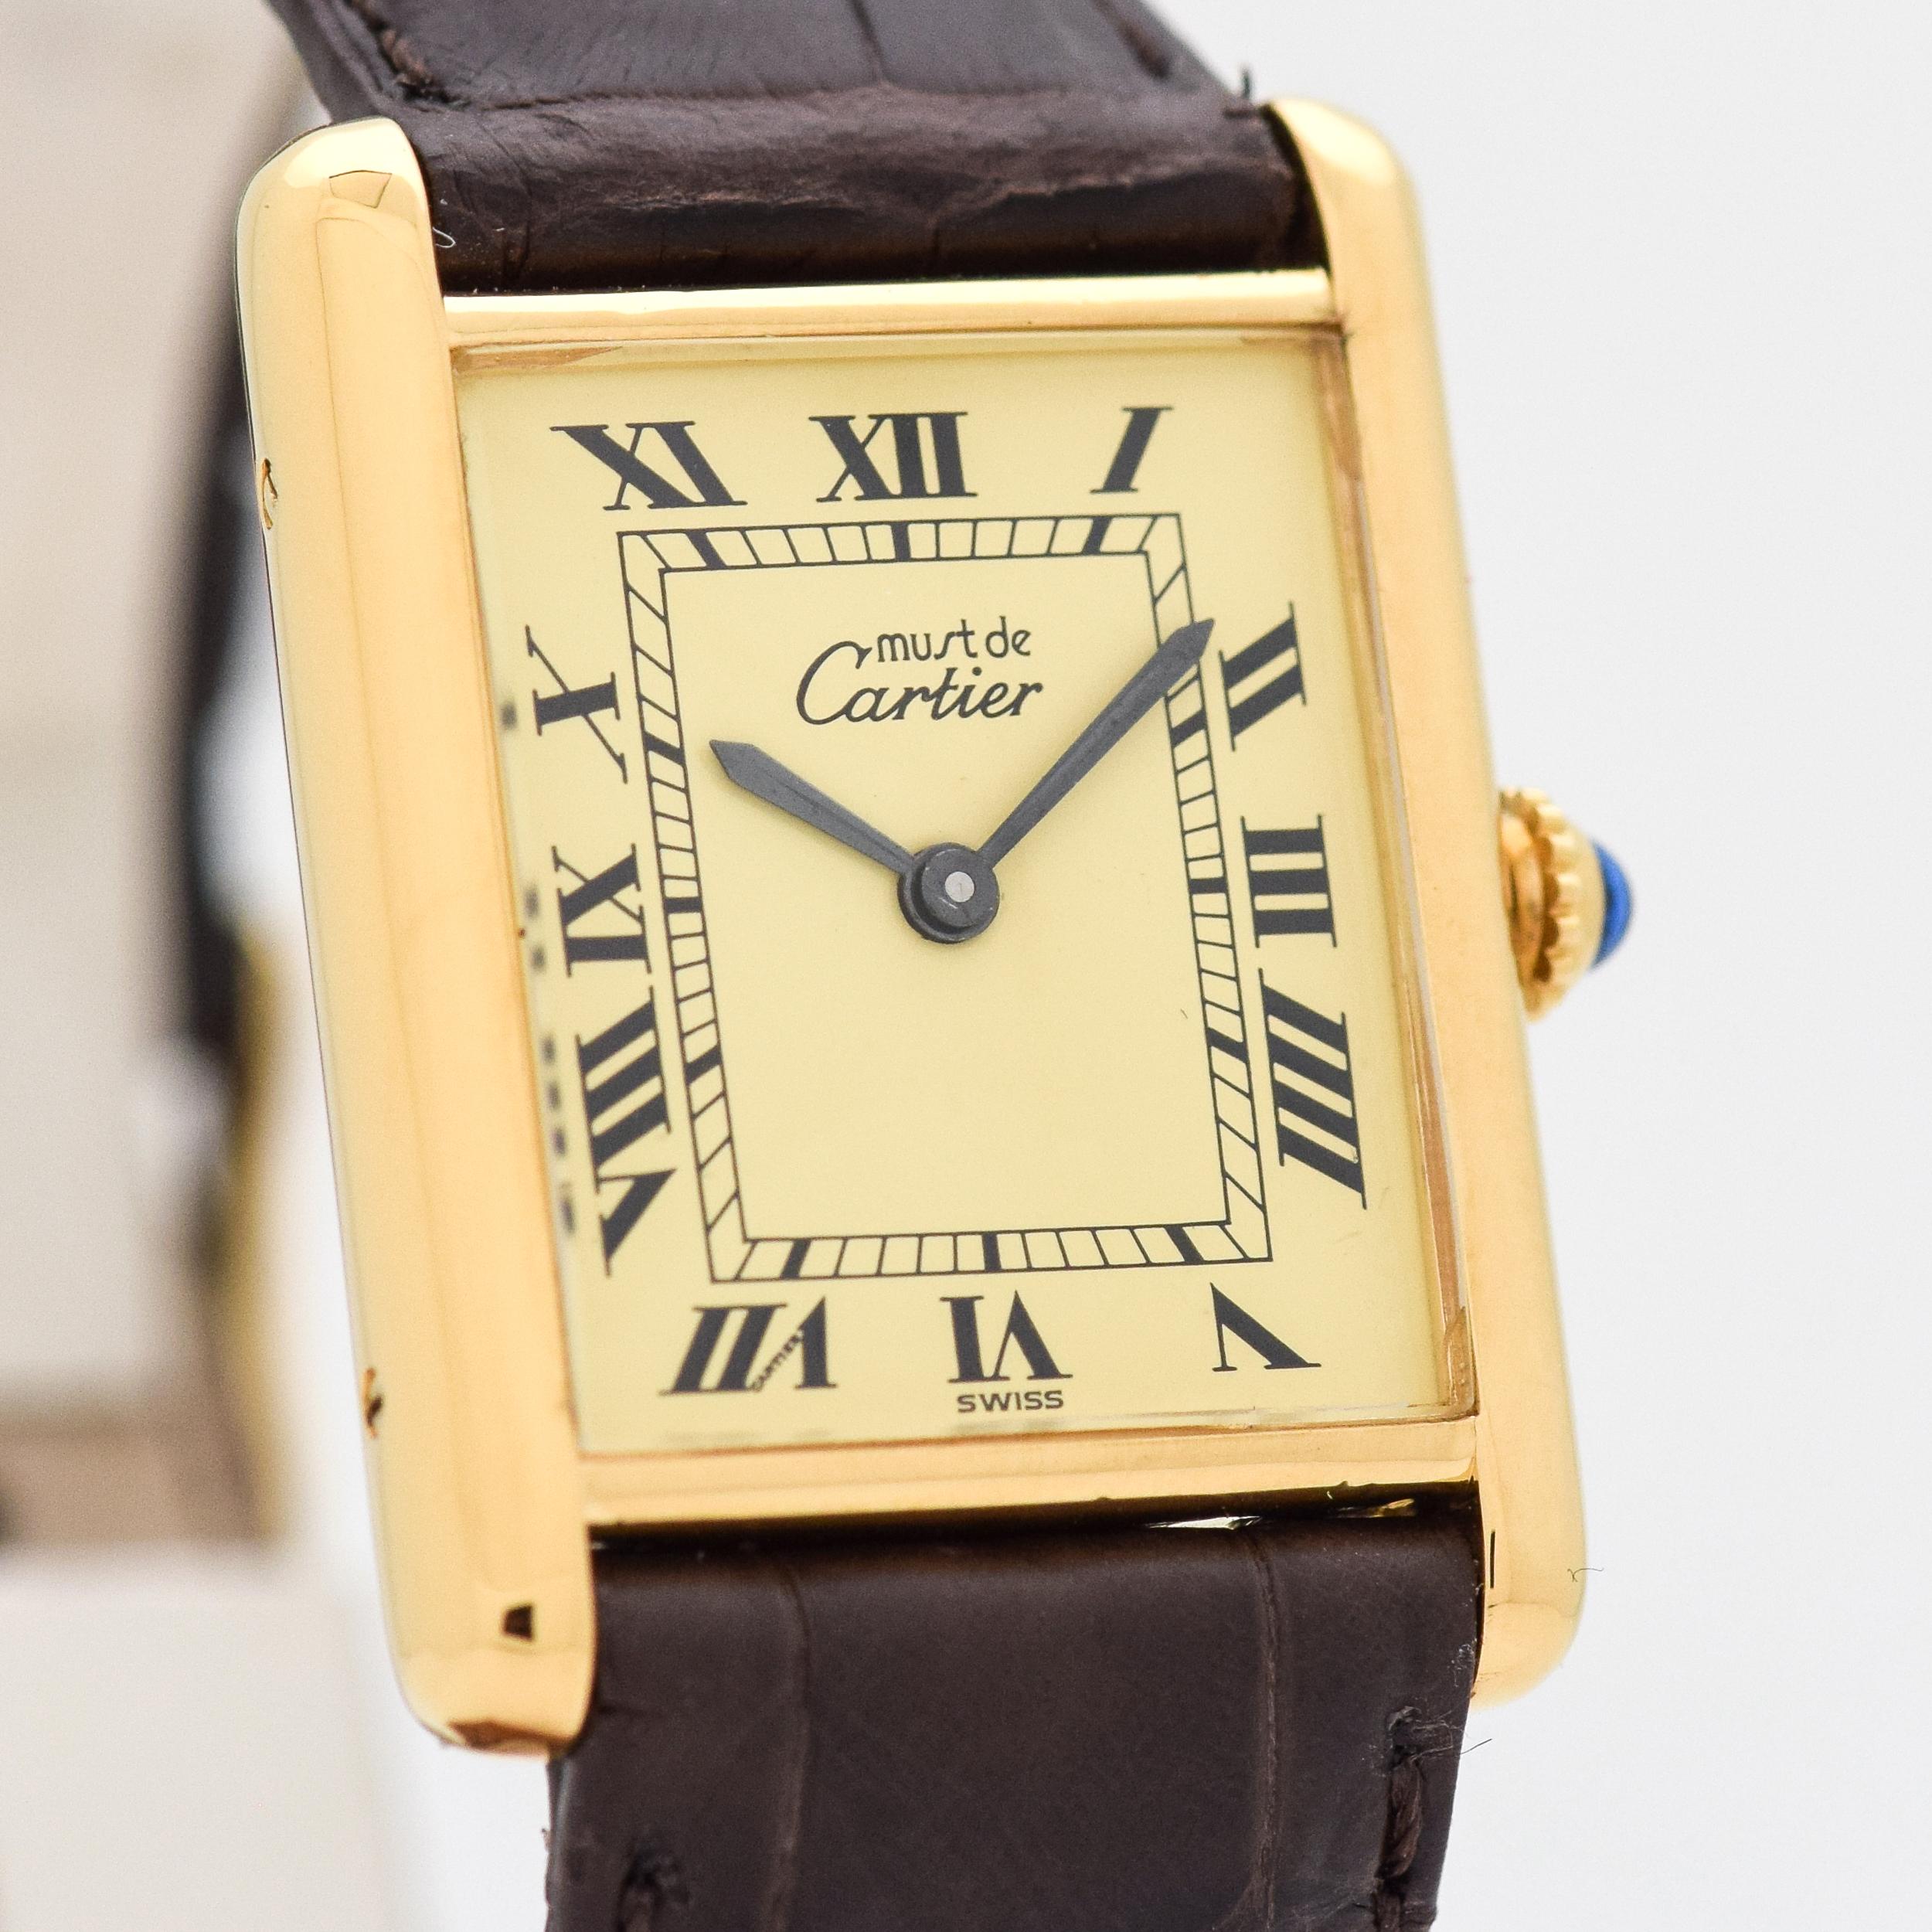 1990's Vintage Cartier Standard Men's Size Tank 18k Yellow Gold Plated Over Sterling Manual Wind watch with Original Gold/Champagne Dial with Black Roman Numerals. Suitable for a Man or a Woman. 23mm x 30mm lug to lug (0.91 in. x 1.18 in.) 17 jewel,